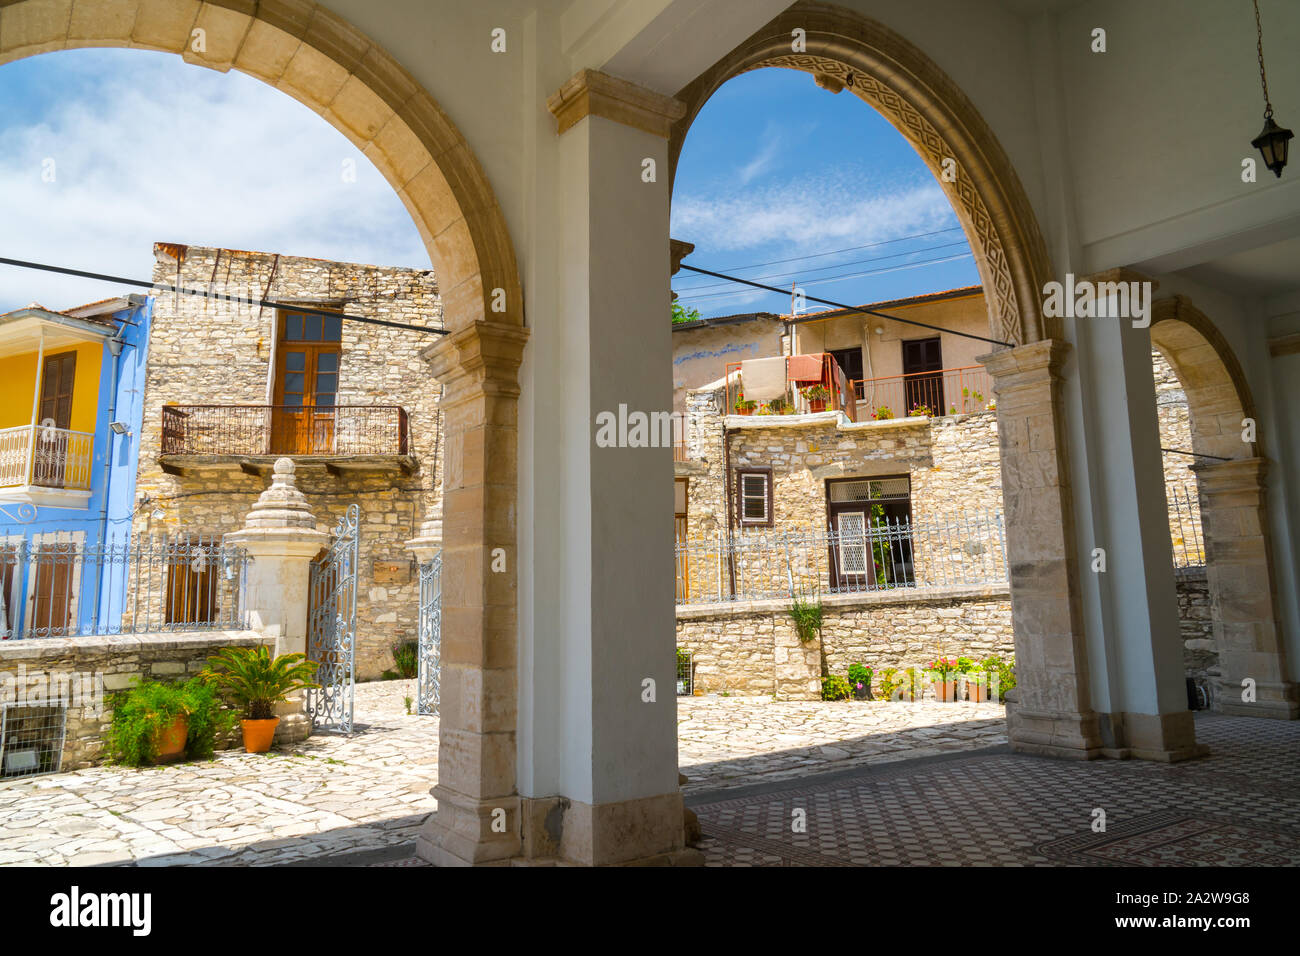 Old Village in Cyprus with historic buildings and archers Stock Photo